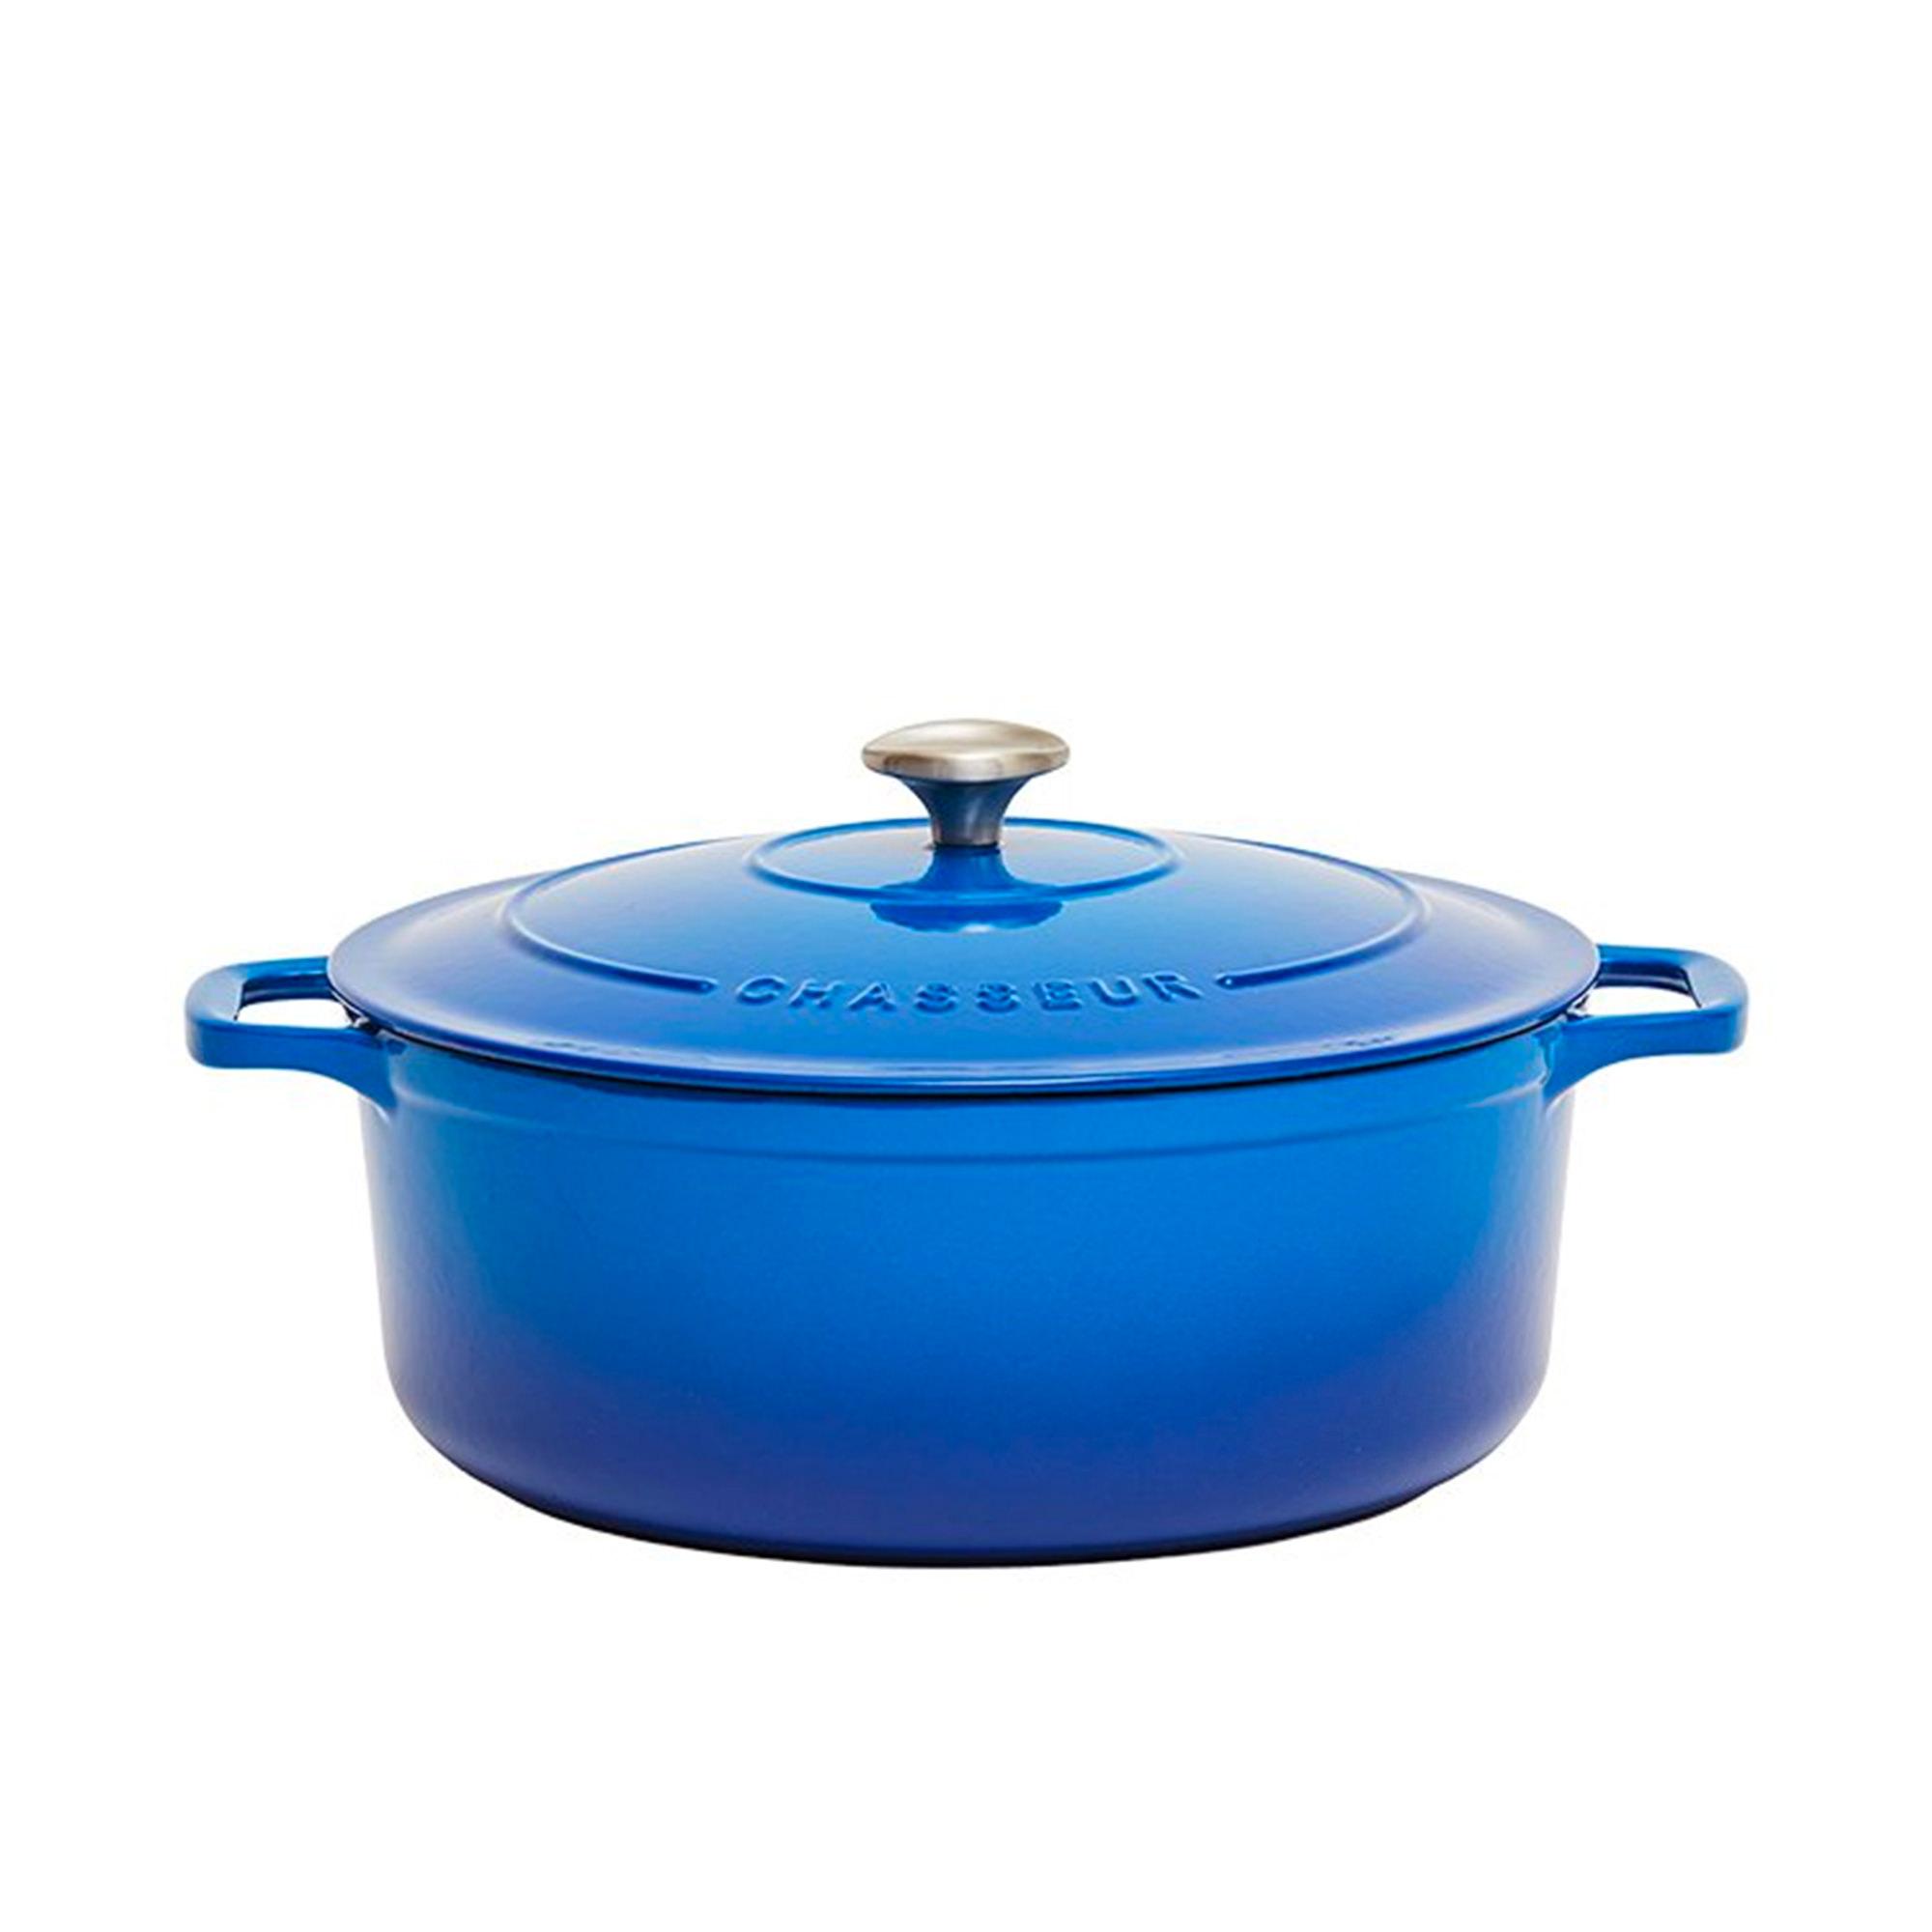 Chasseur Round French Oven 28cm - 6.1L Imperial Blue Image 1